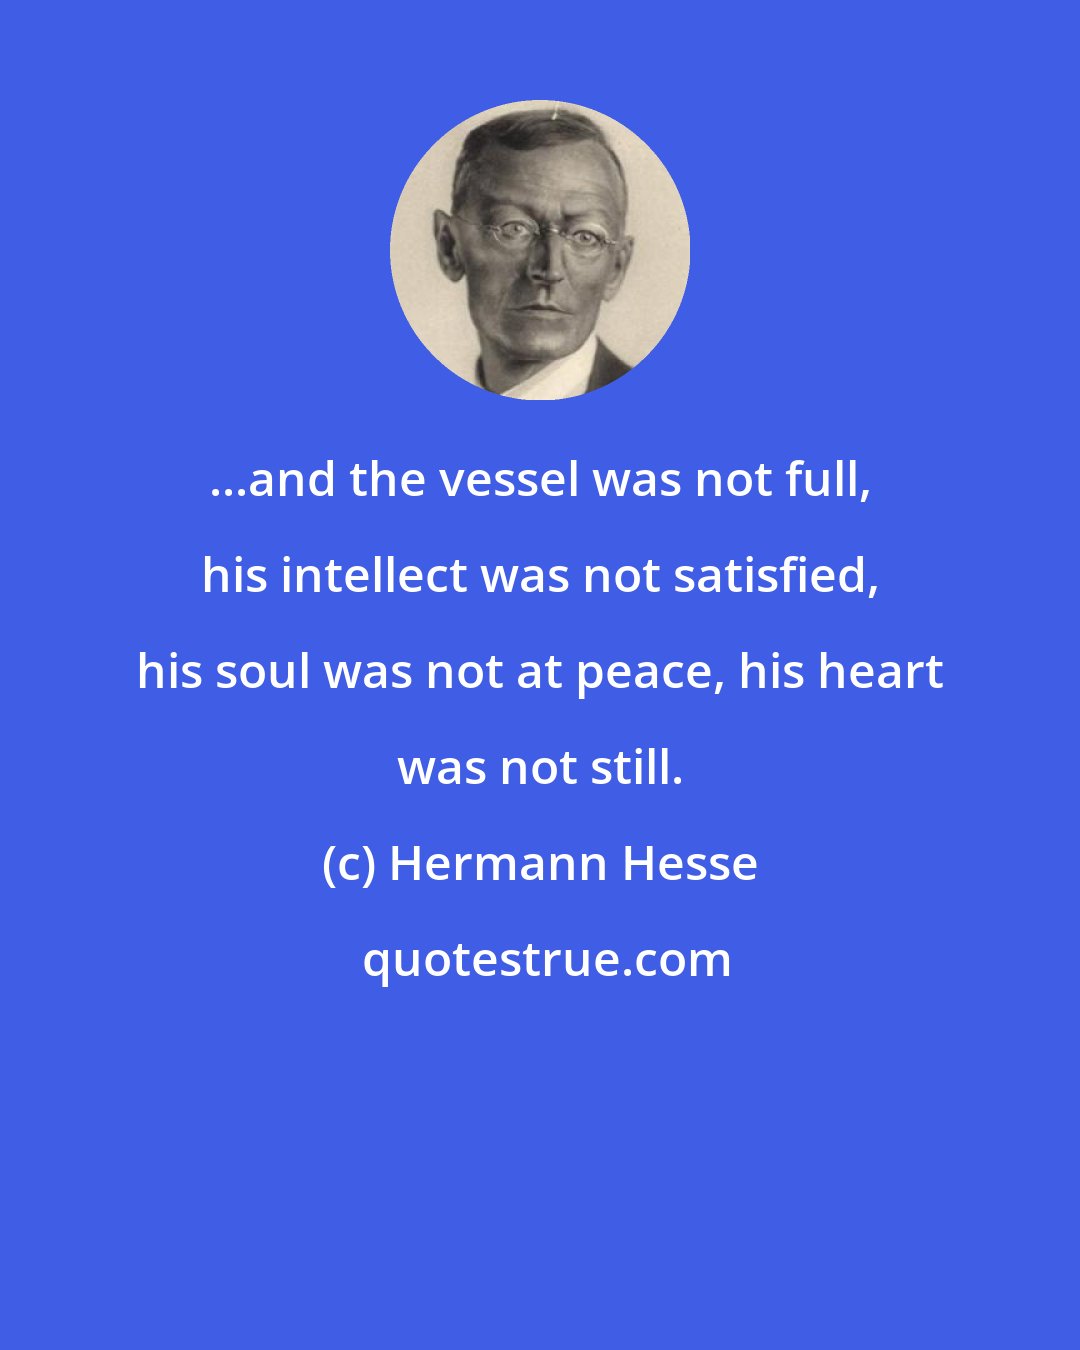 Hermann Hesse: ...and the vessel was not full, his intellect was not satisfied, his soul was not at peace, his heart was not still.